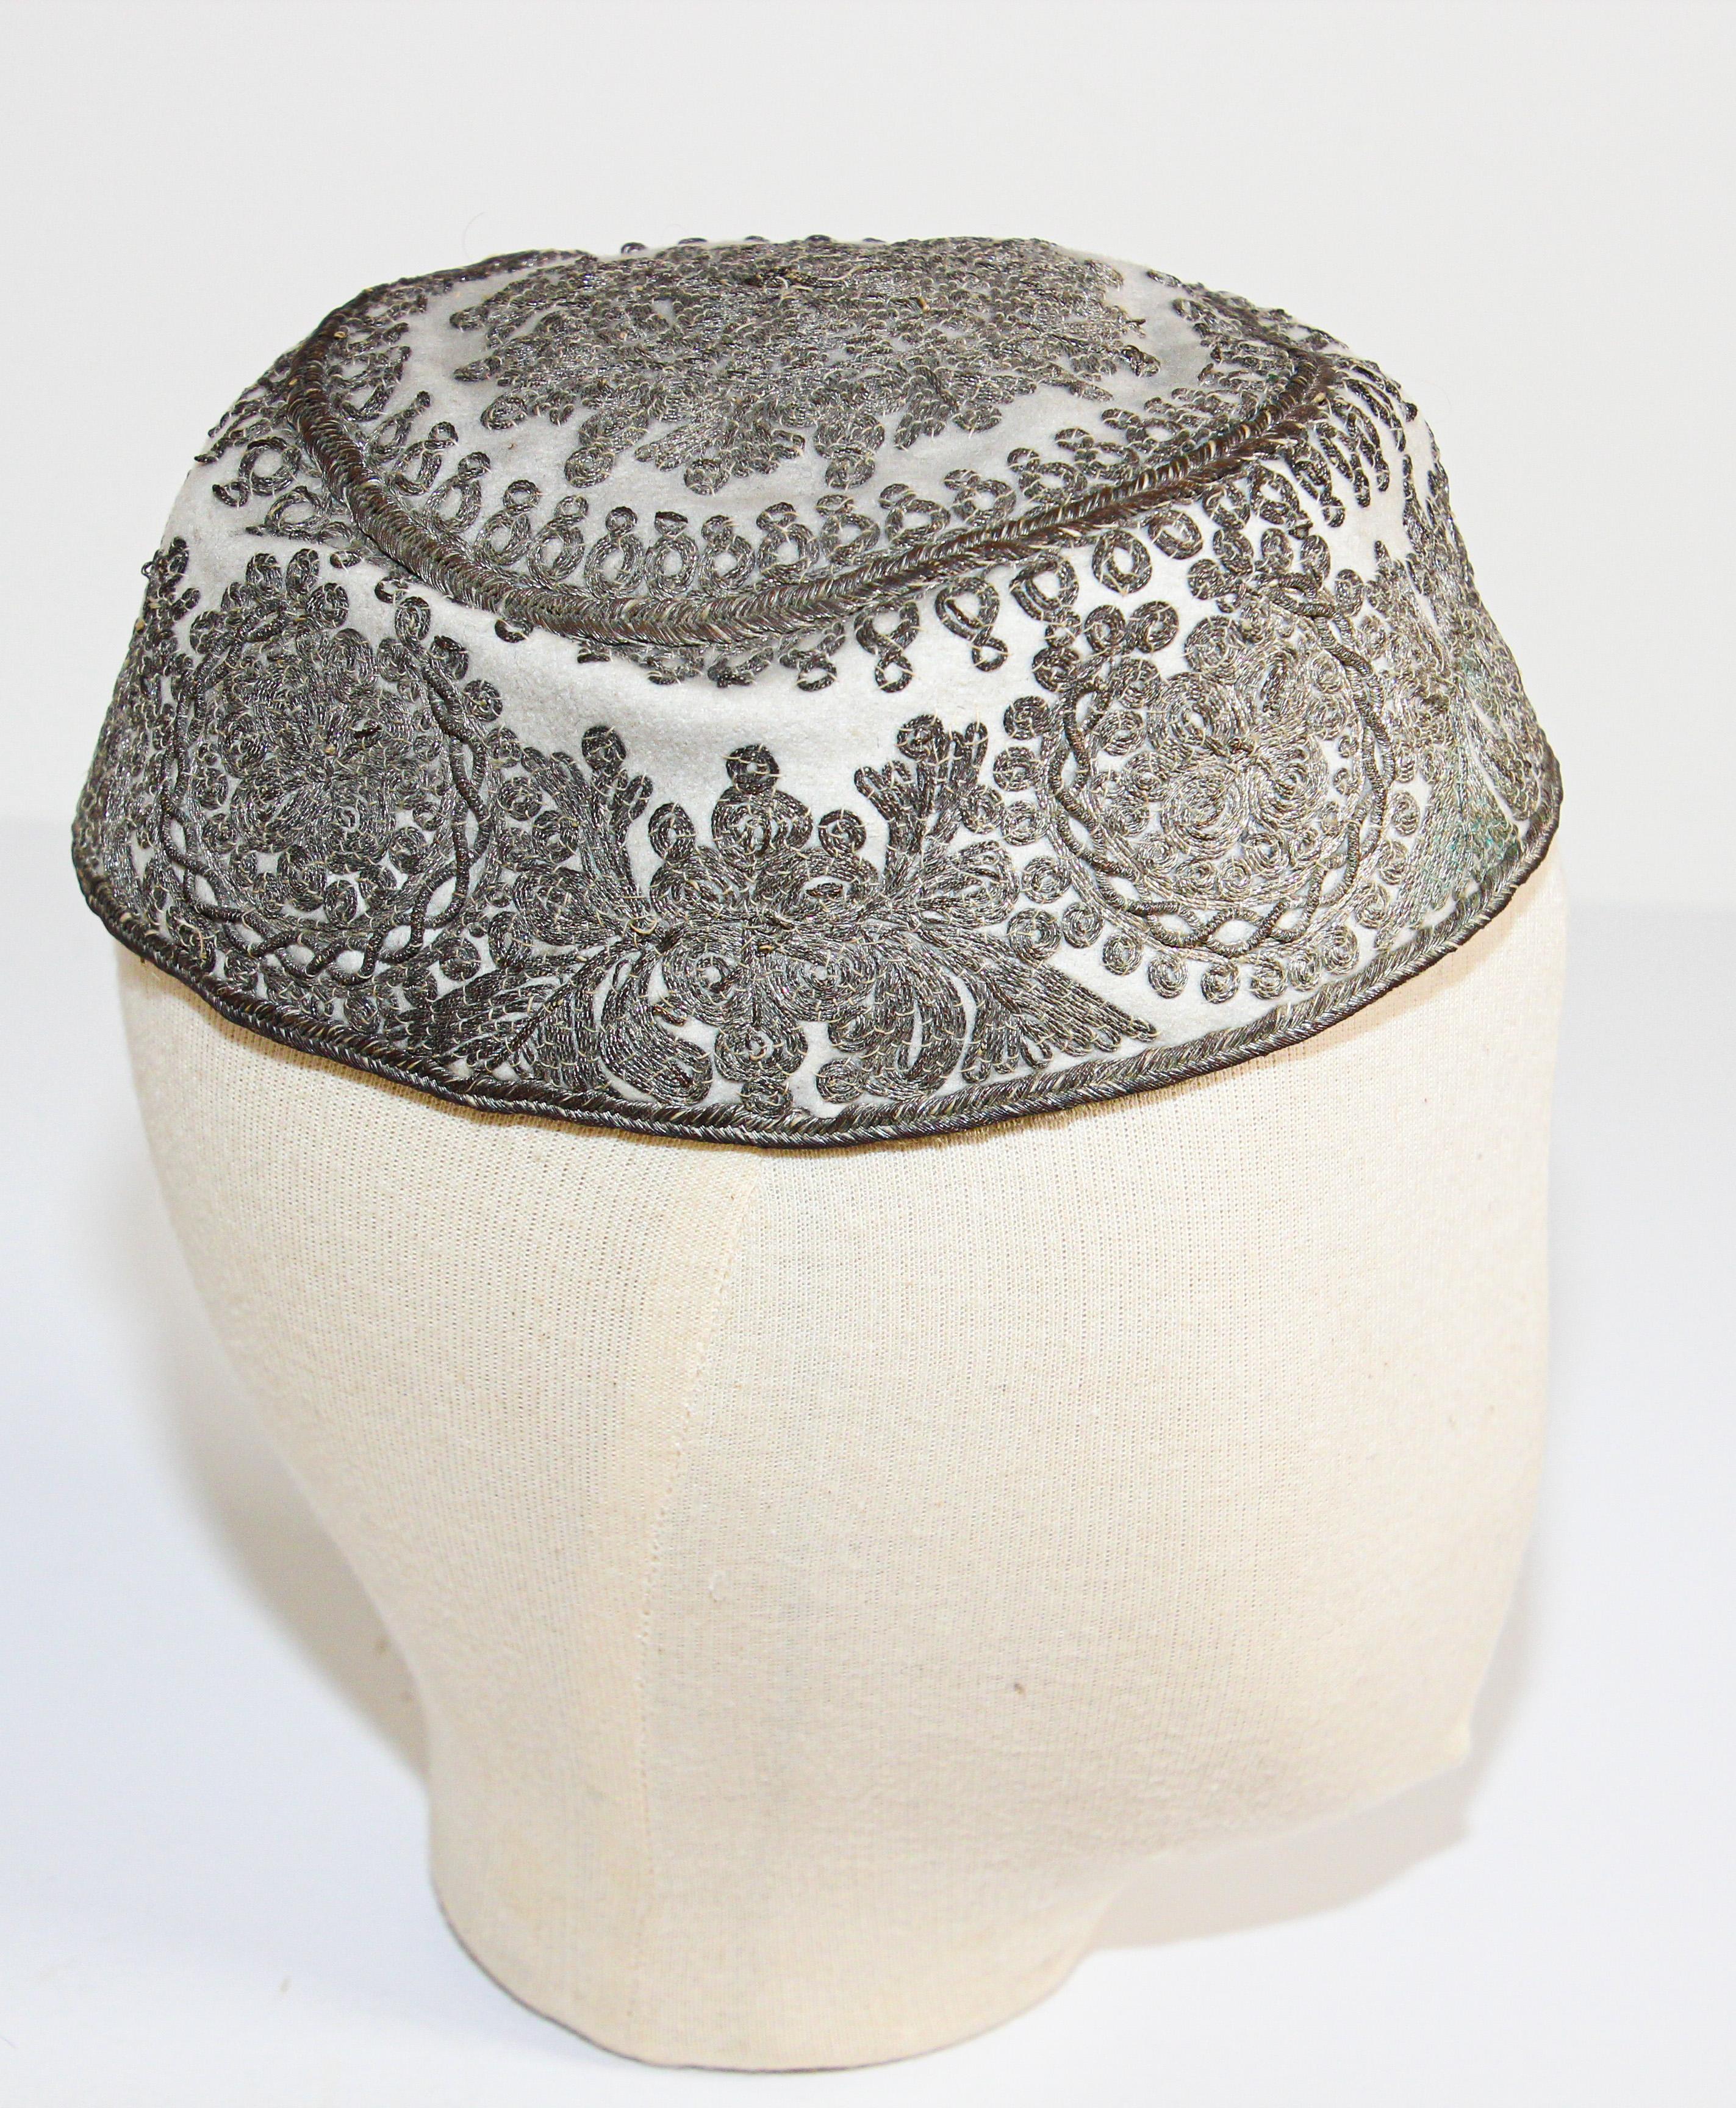 middle eastern hat